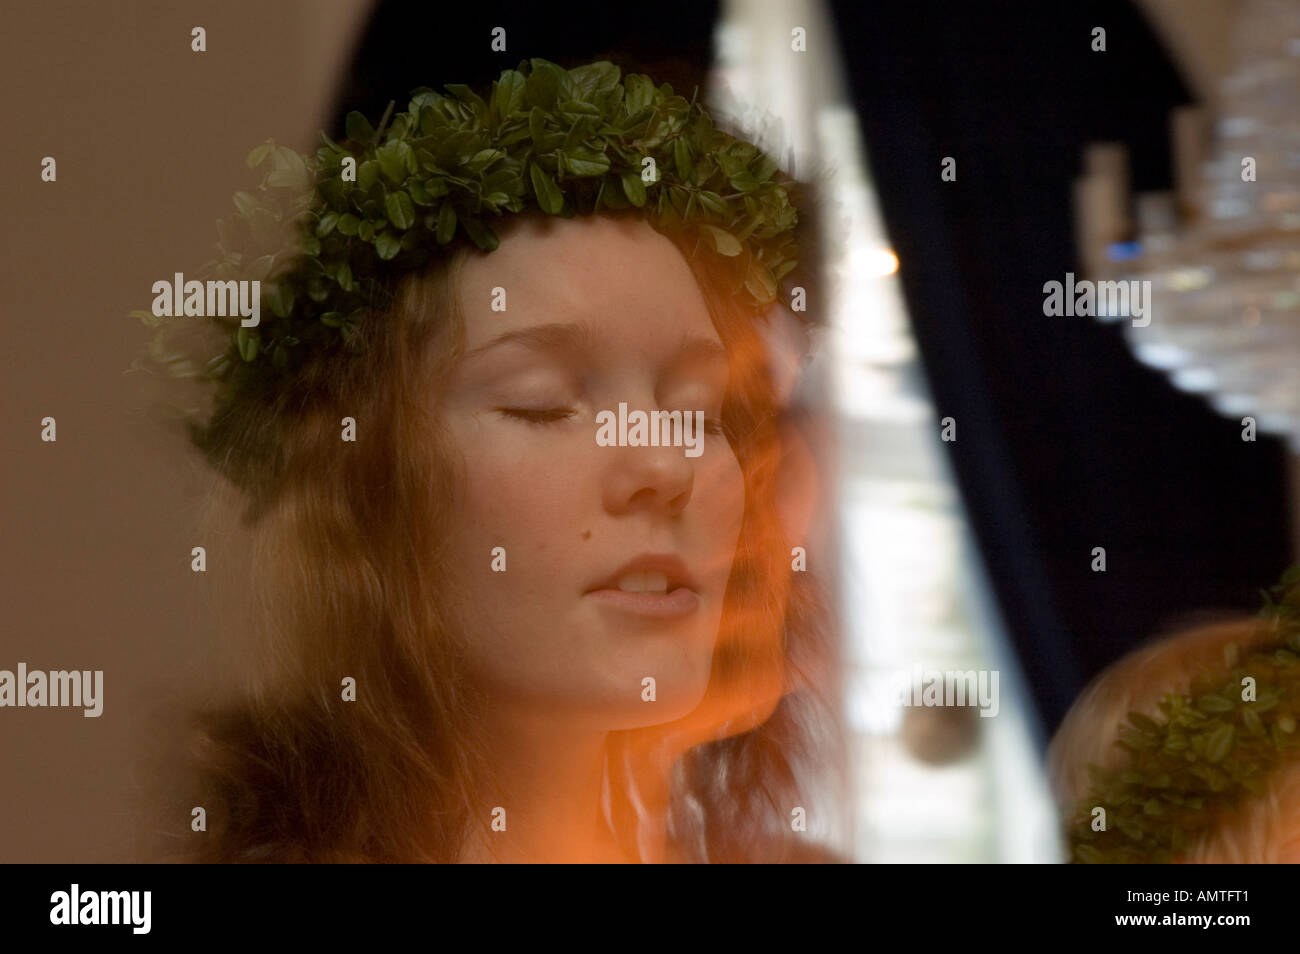 Face of a girl with crown at Santa Lucia, lightfestival celebrated on 13th december in Scandinavia Stock Photo